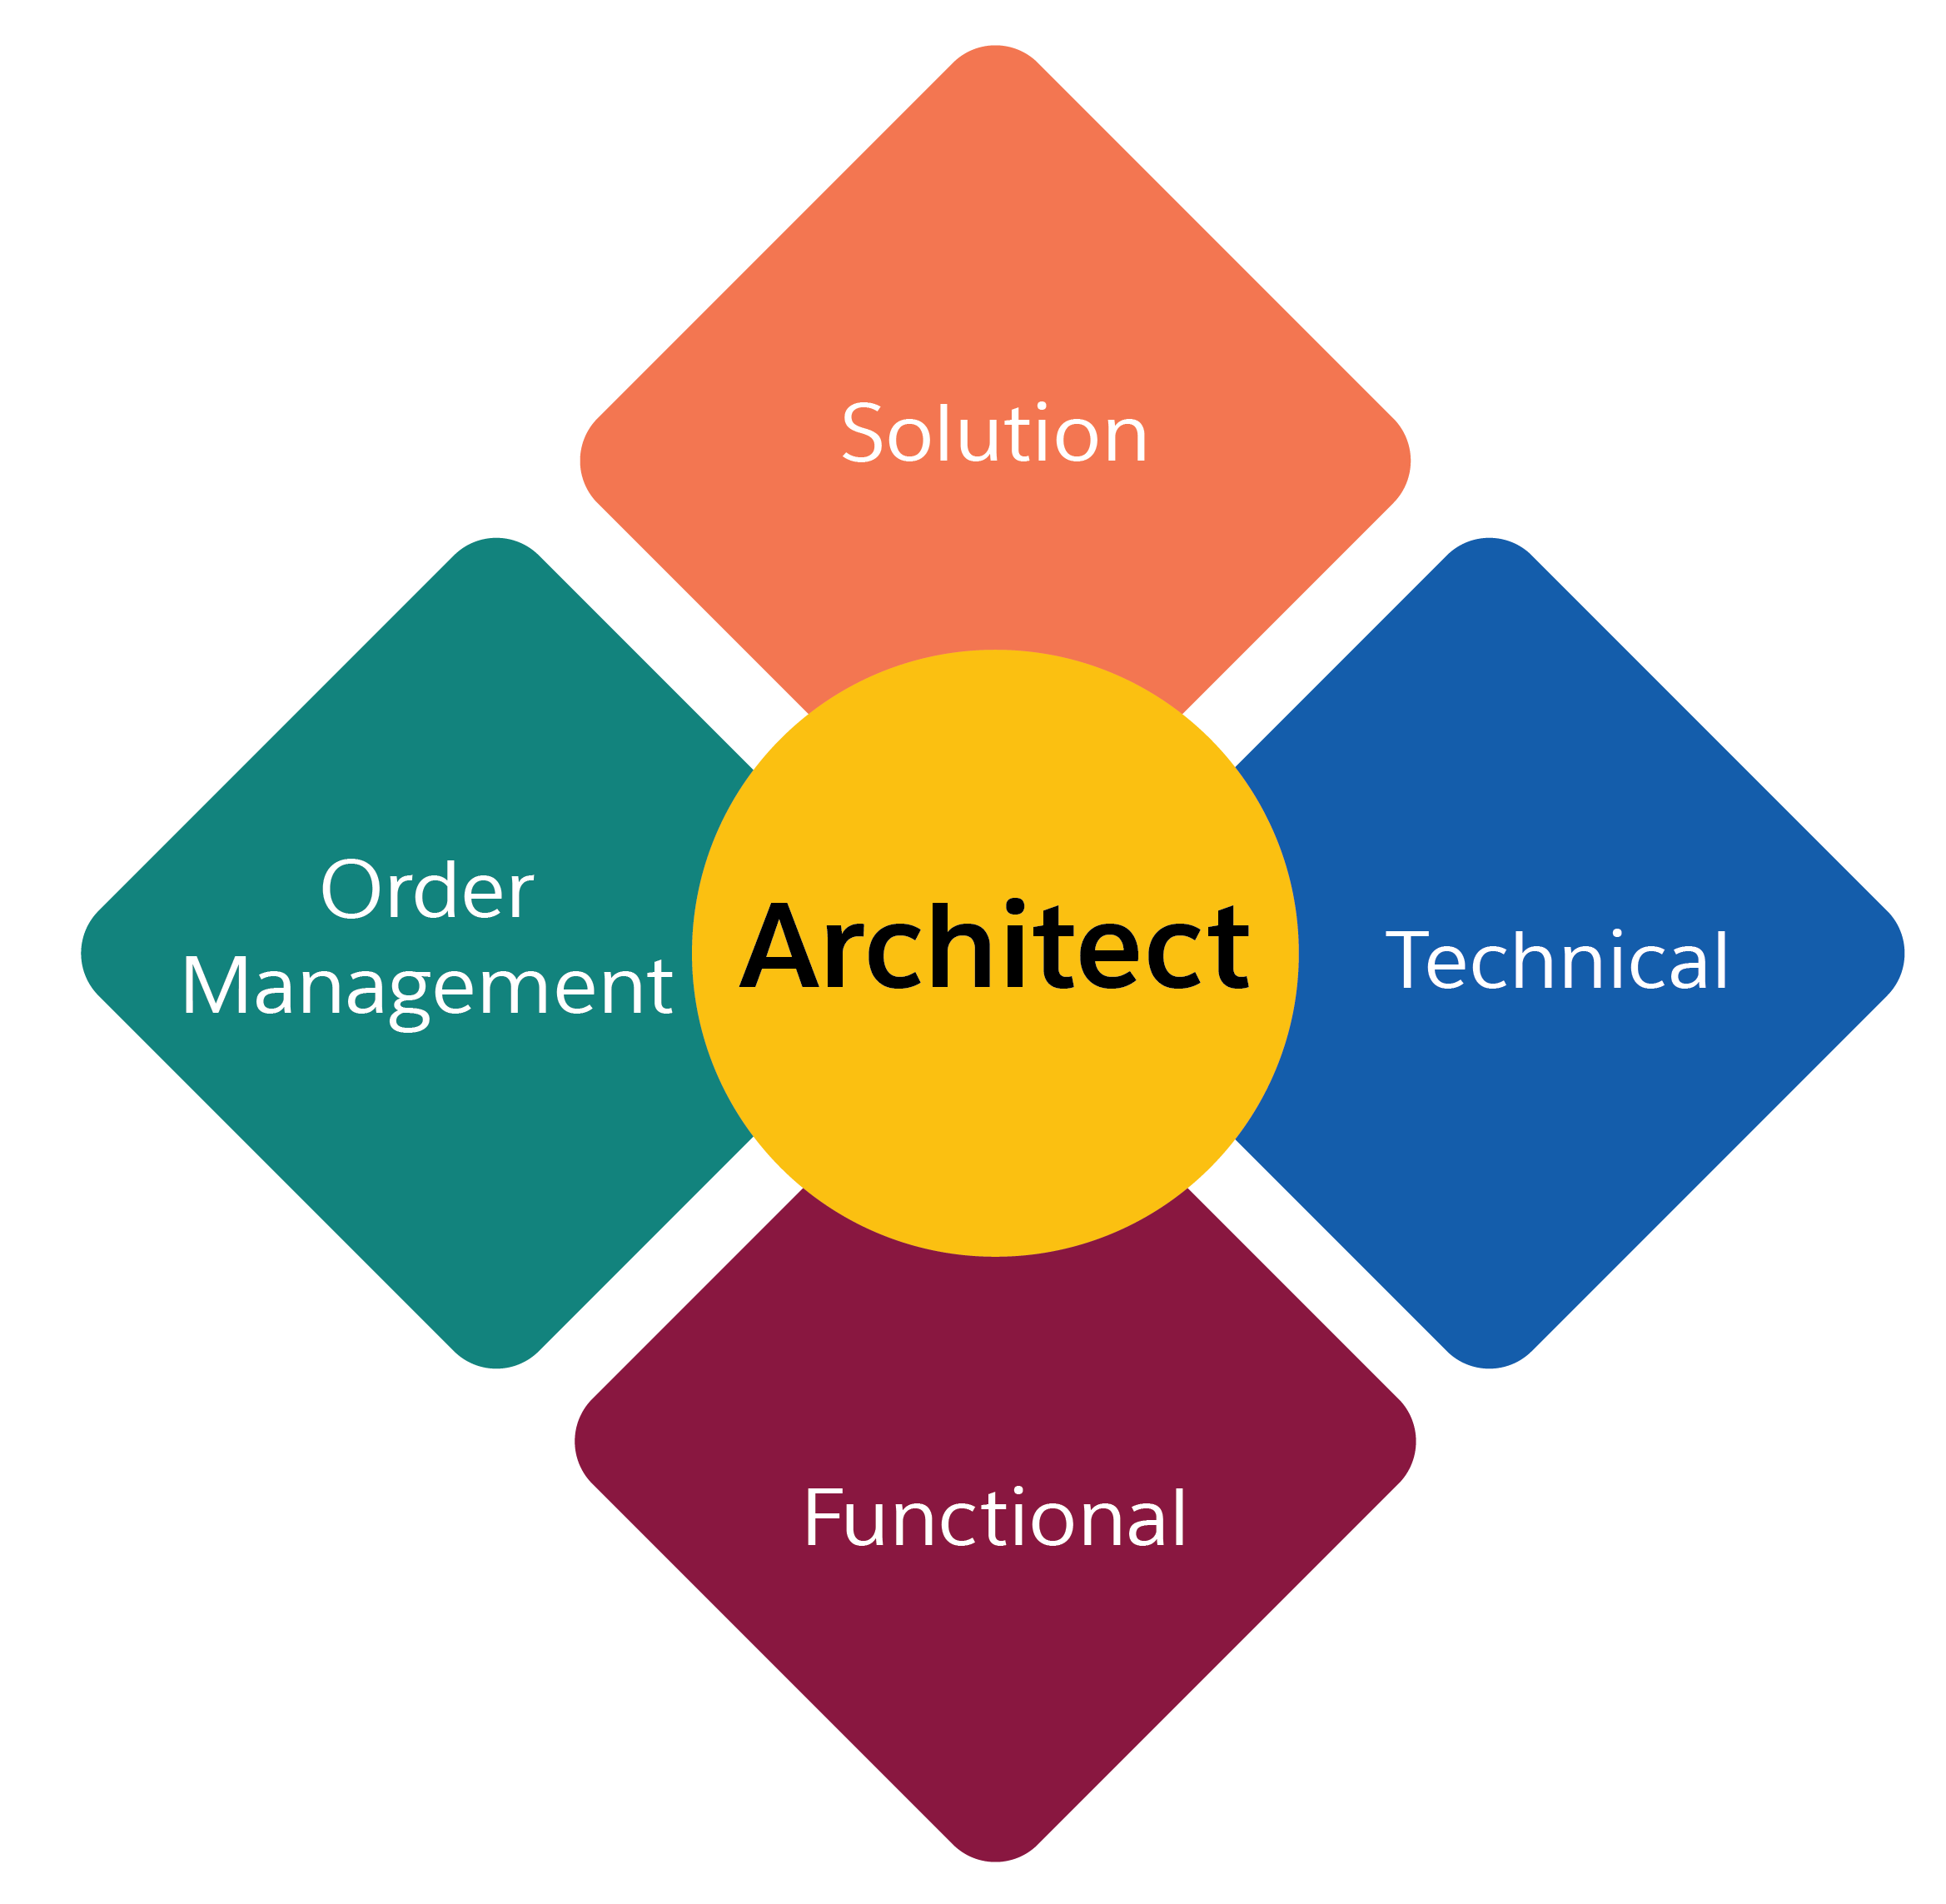 B2C Commerce architects can be functional, technical, technical order management, or solution.